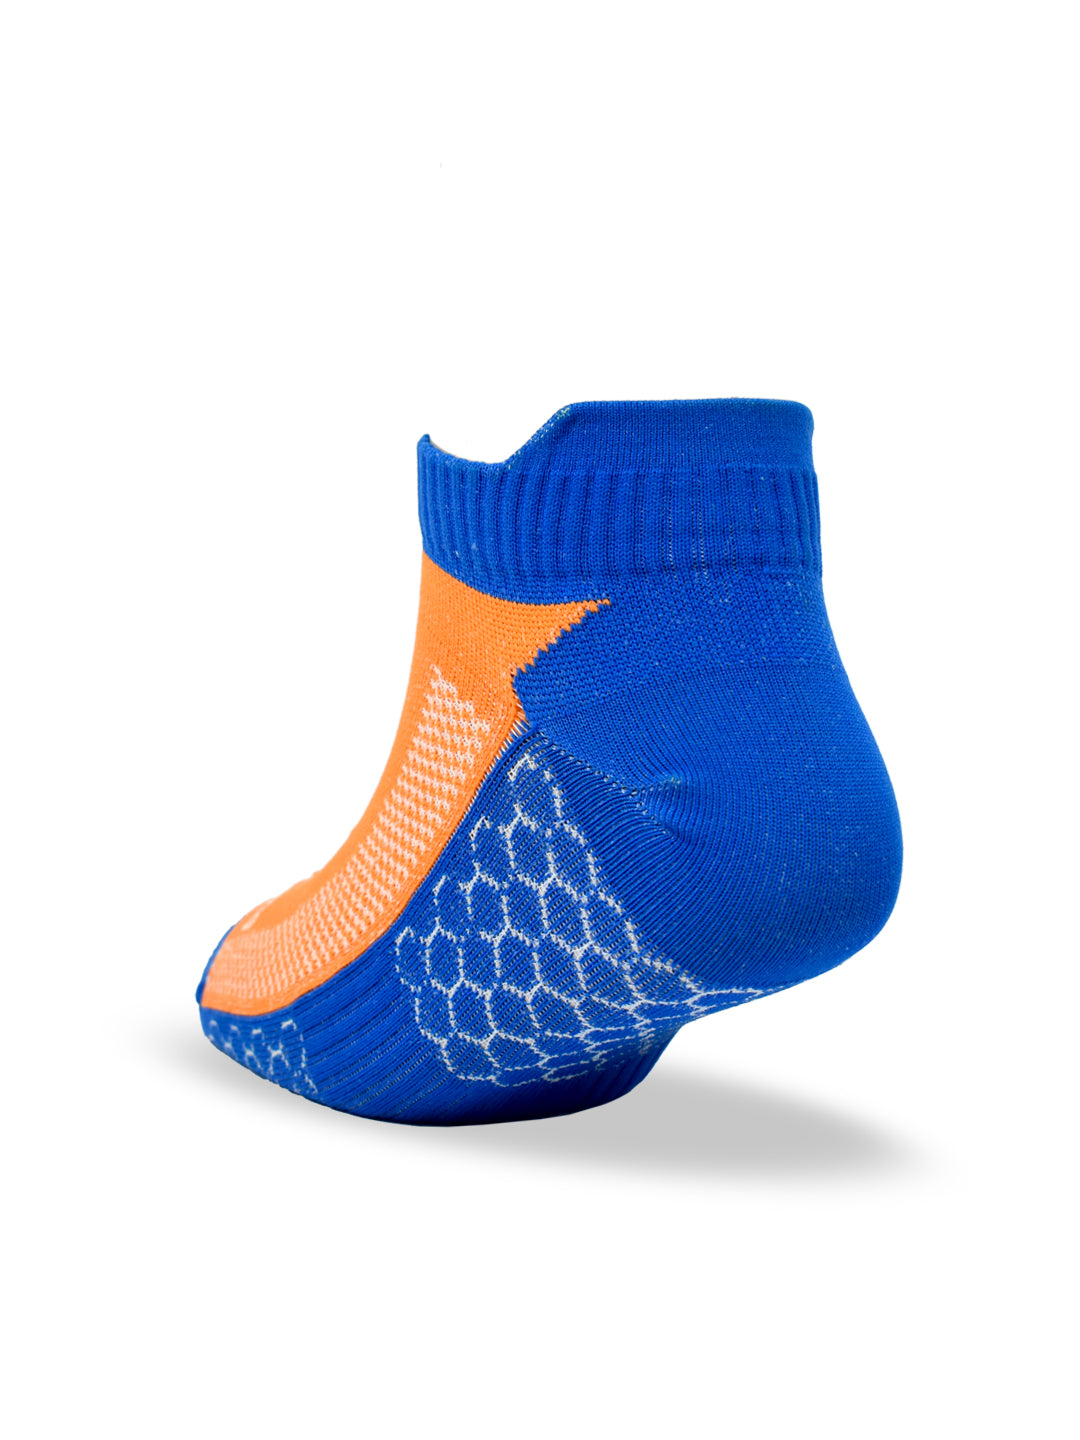 Young Wings Anti-Bacterial Dri-Fit Ankle Length Running Socks - Pack of 3 Pairs, Colour: Orange/Blue